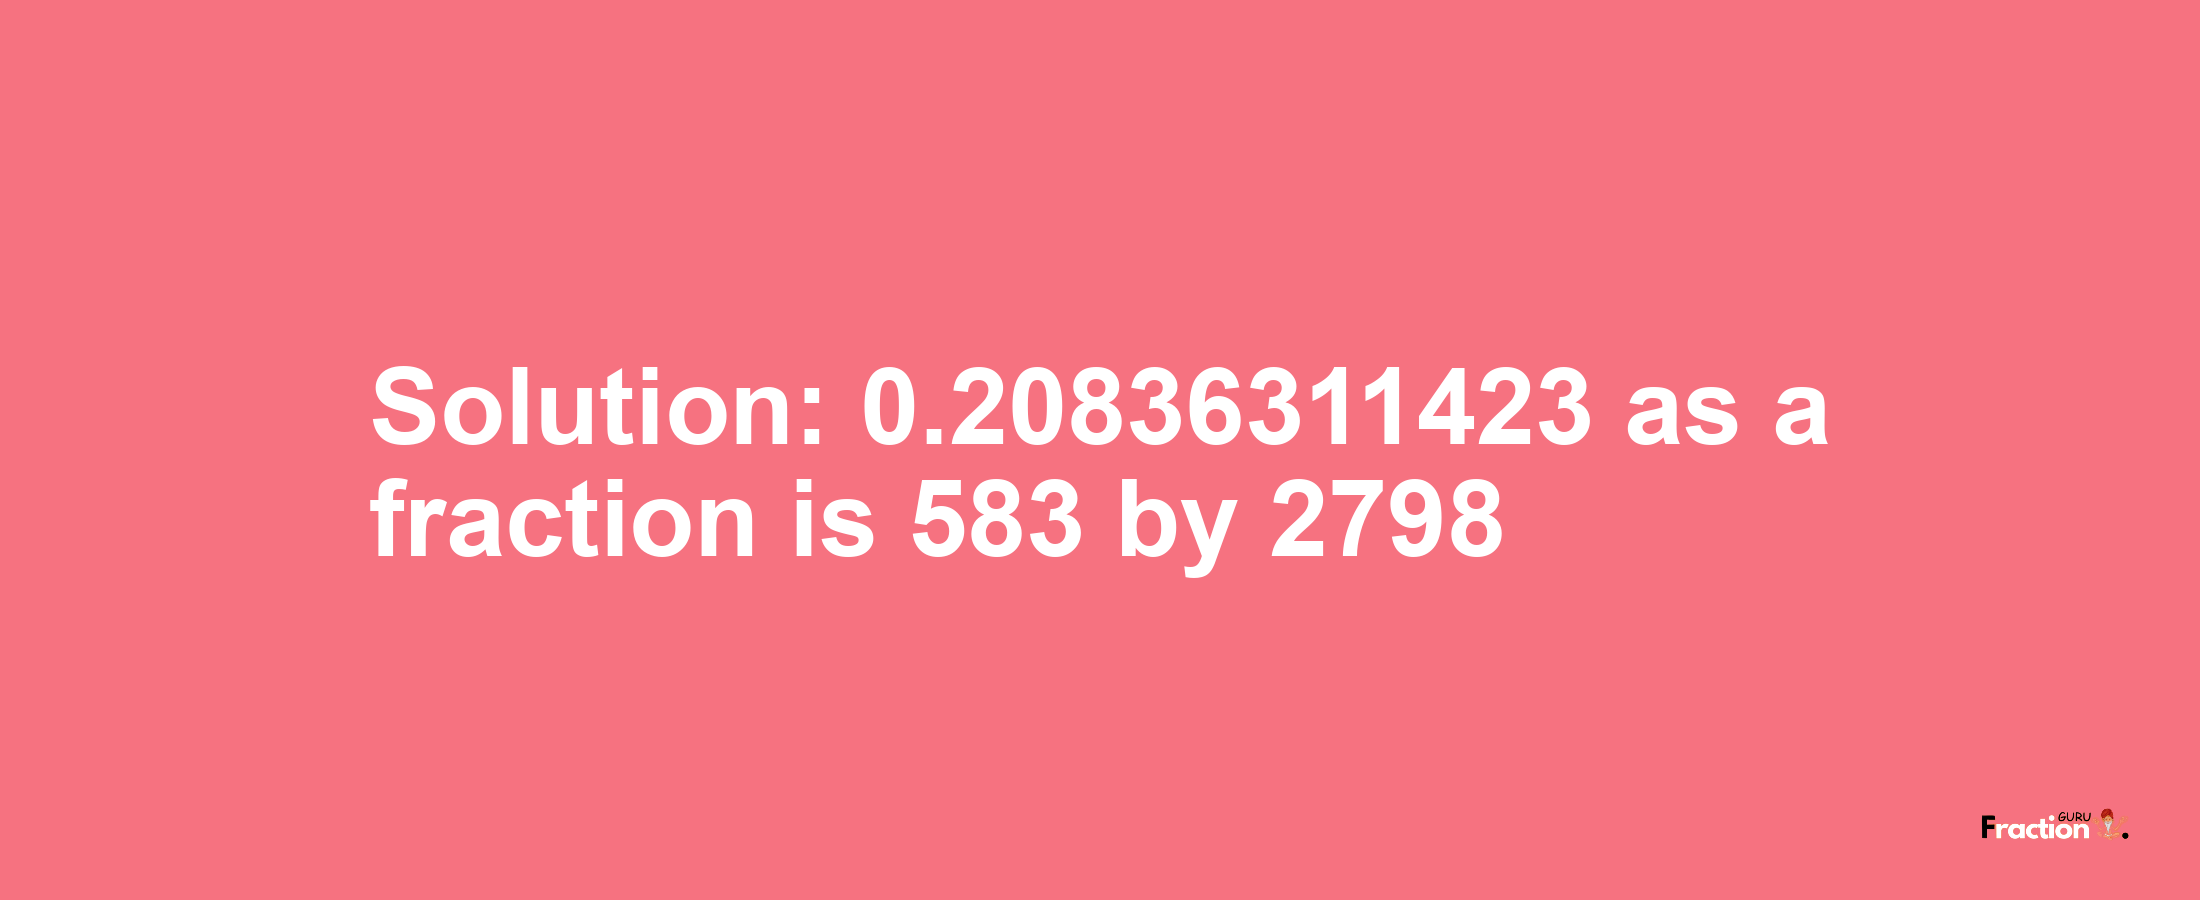 Solution:0.20836311423 as a fraction is 583/2798